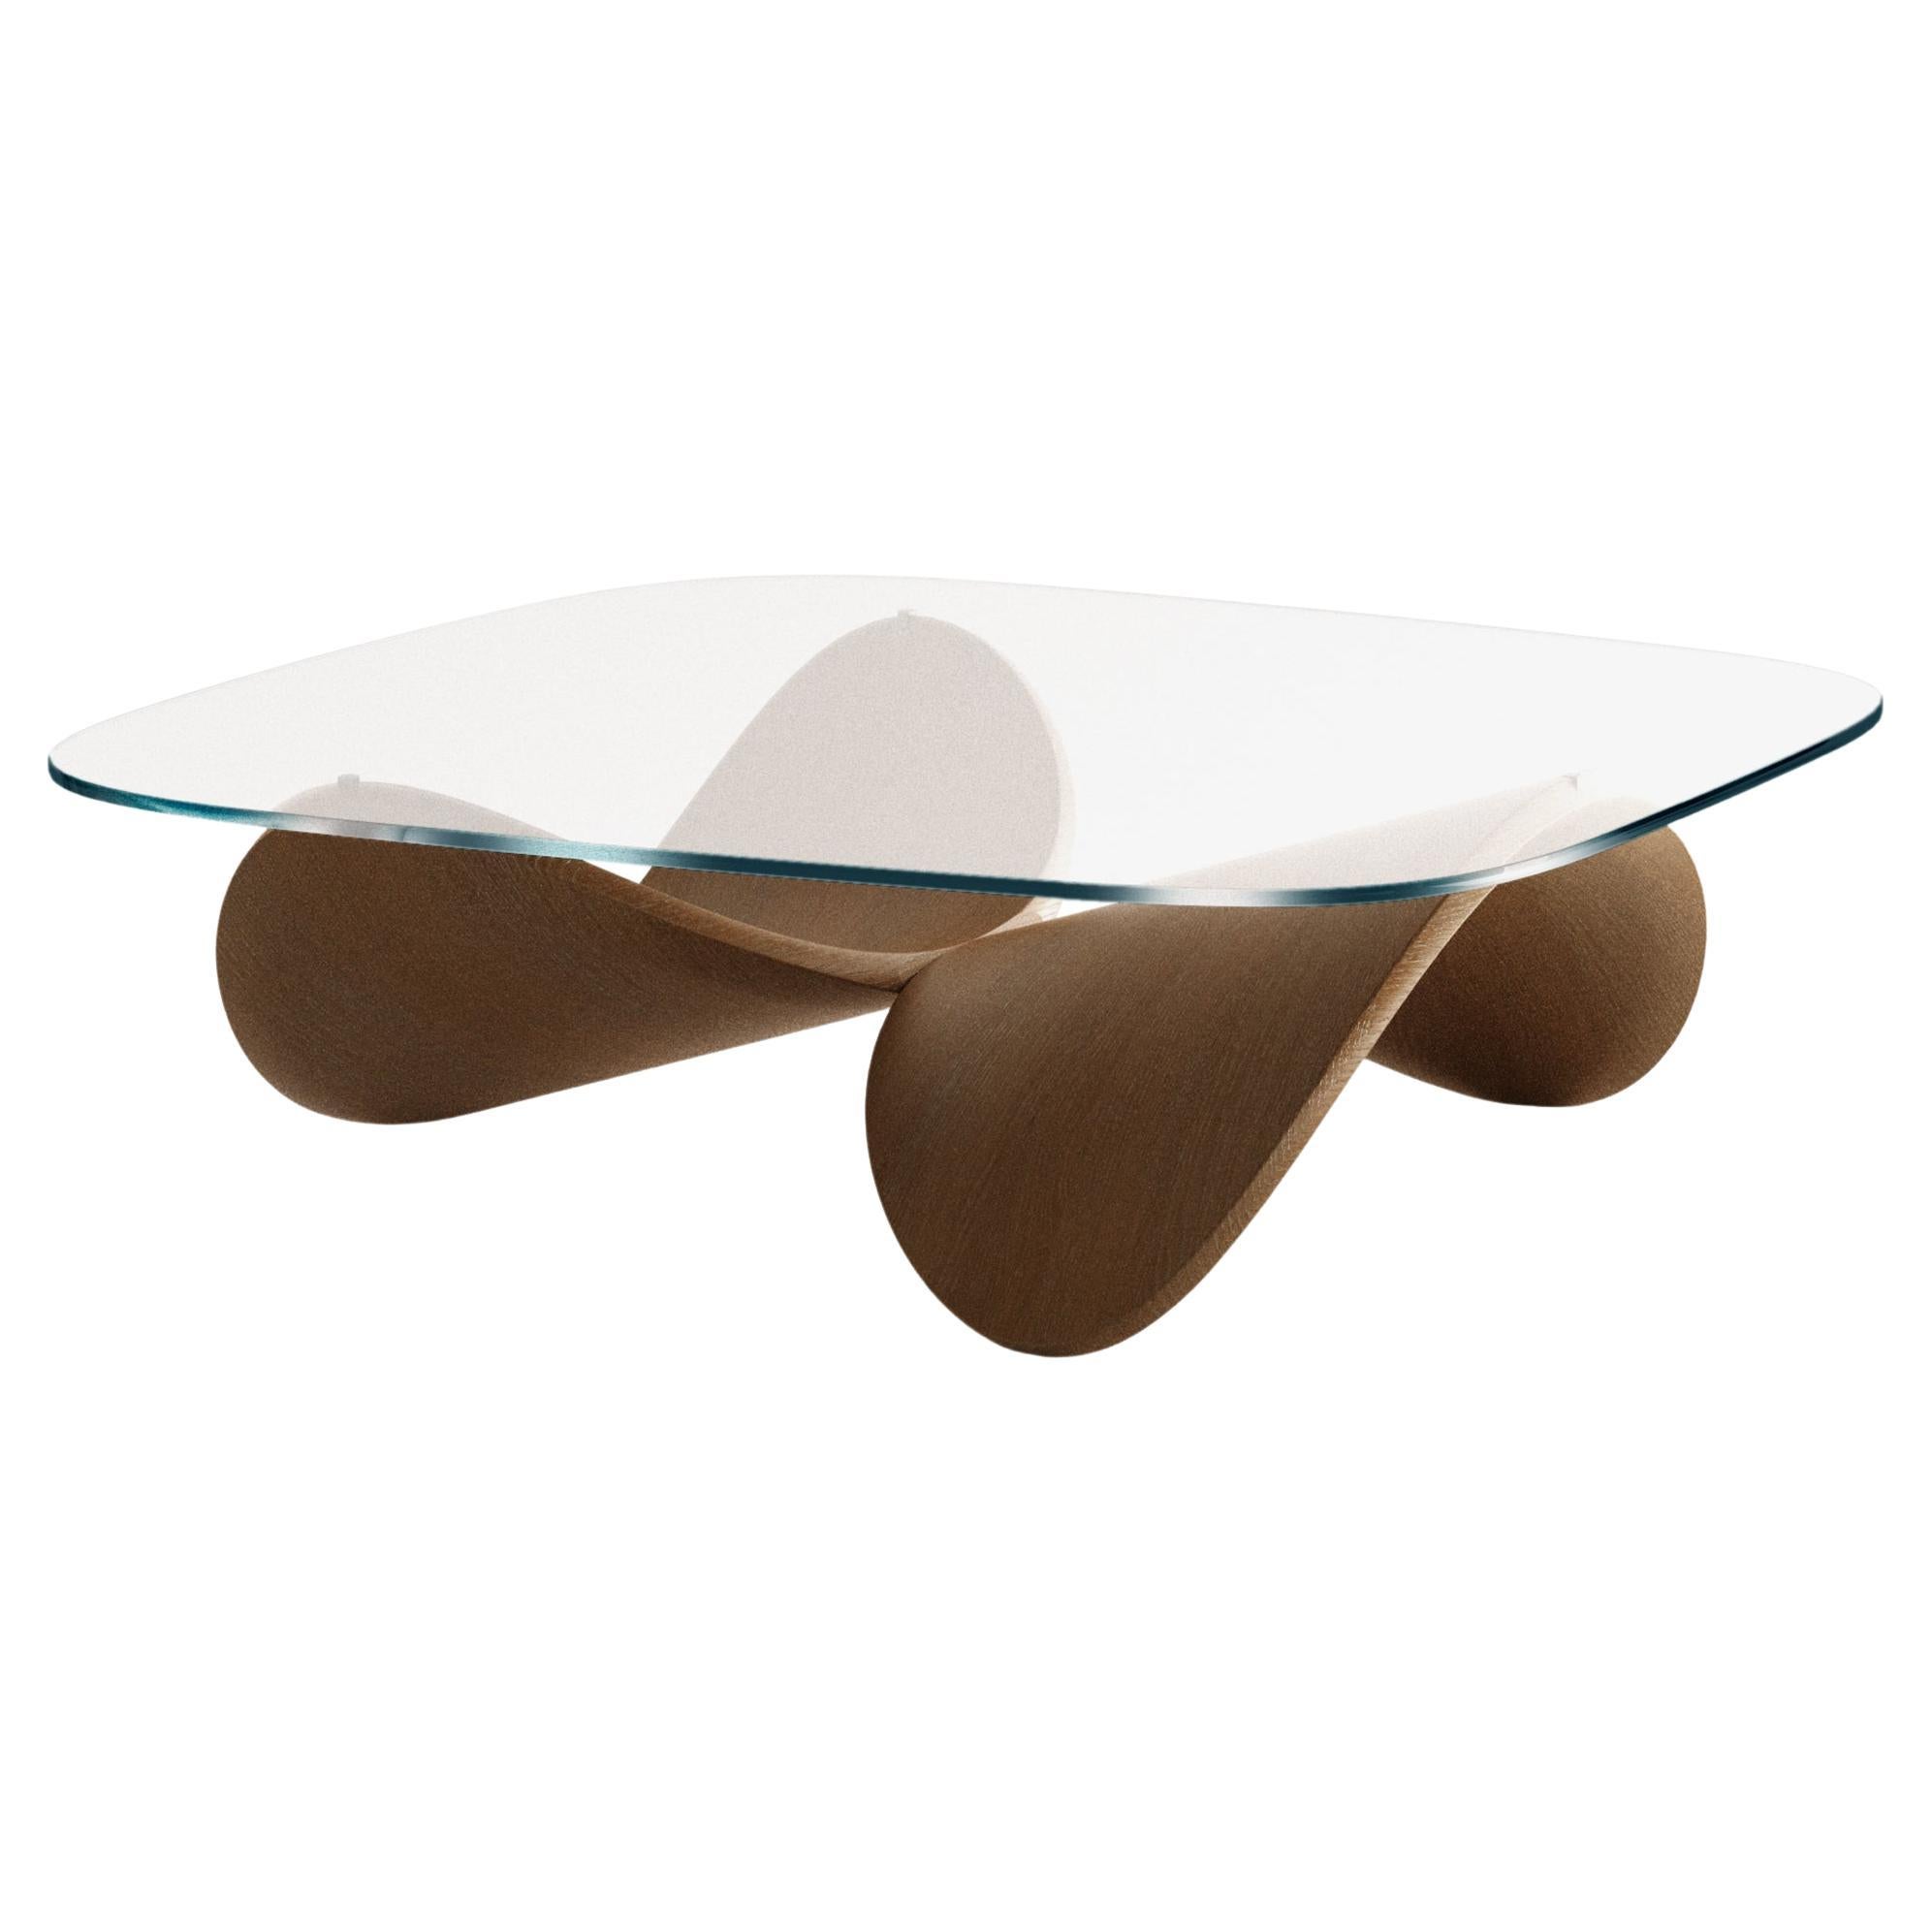 Sculptural Wooden Coffee Table in a Natural Brown Stain and Glass Top, Italy For Sale